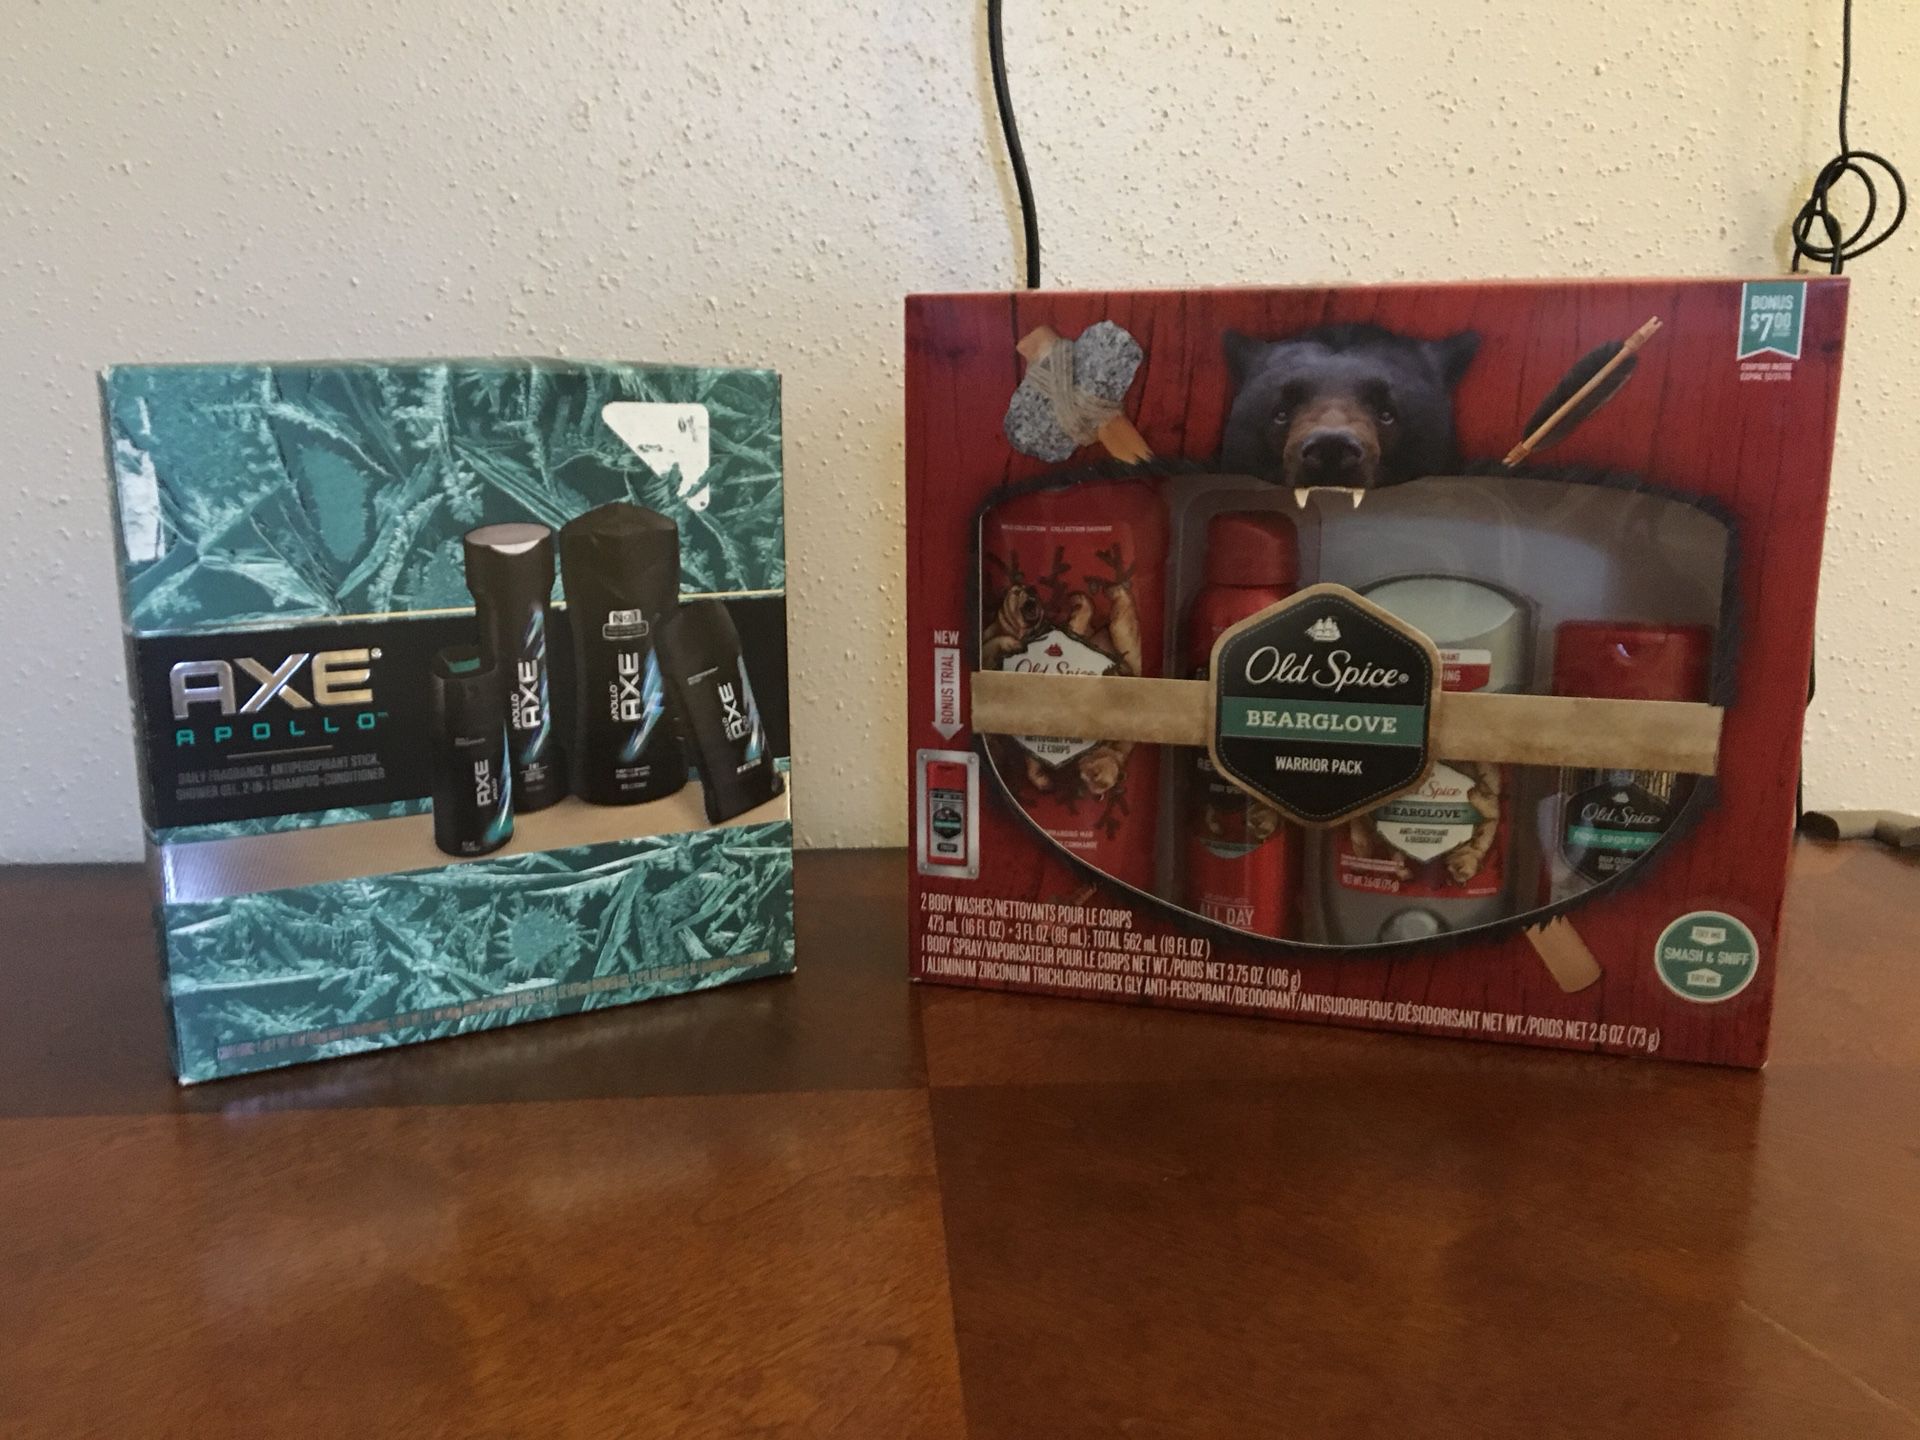 AXE and OLD SPICE Gift Set for men. Axe Apollo set and Old Spice Bear Glove scent. $10 each. Cash only. No trades no holds. Pickup in Spring 77373